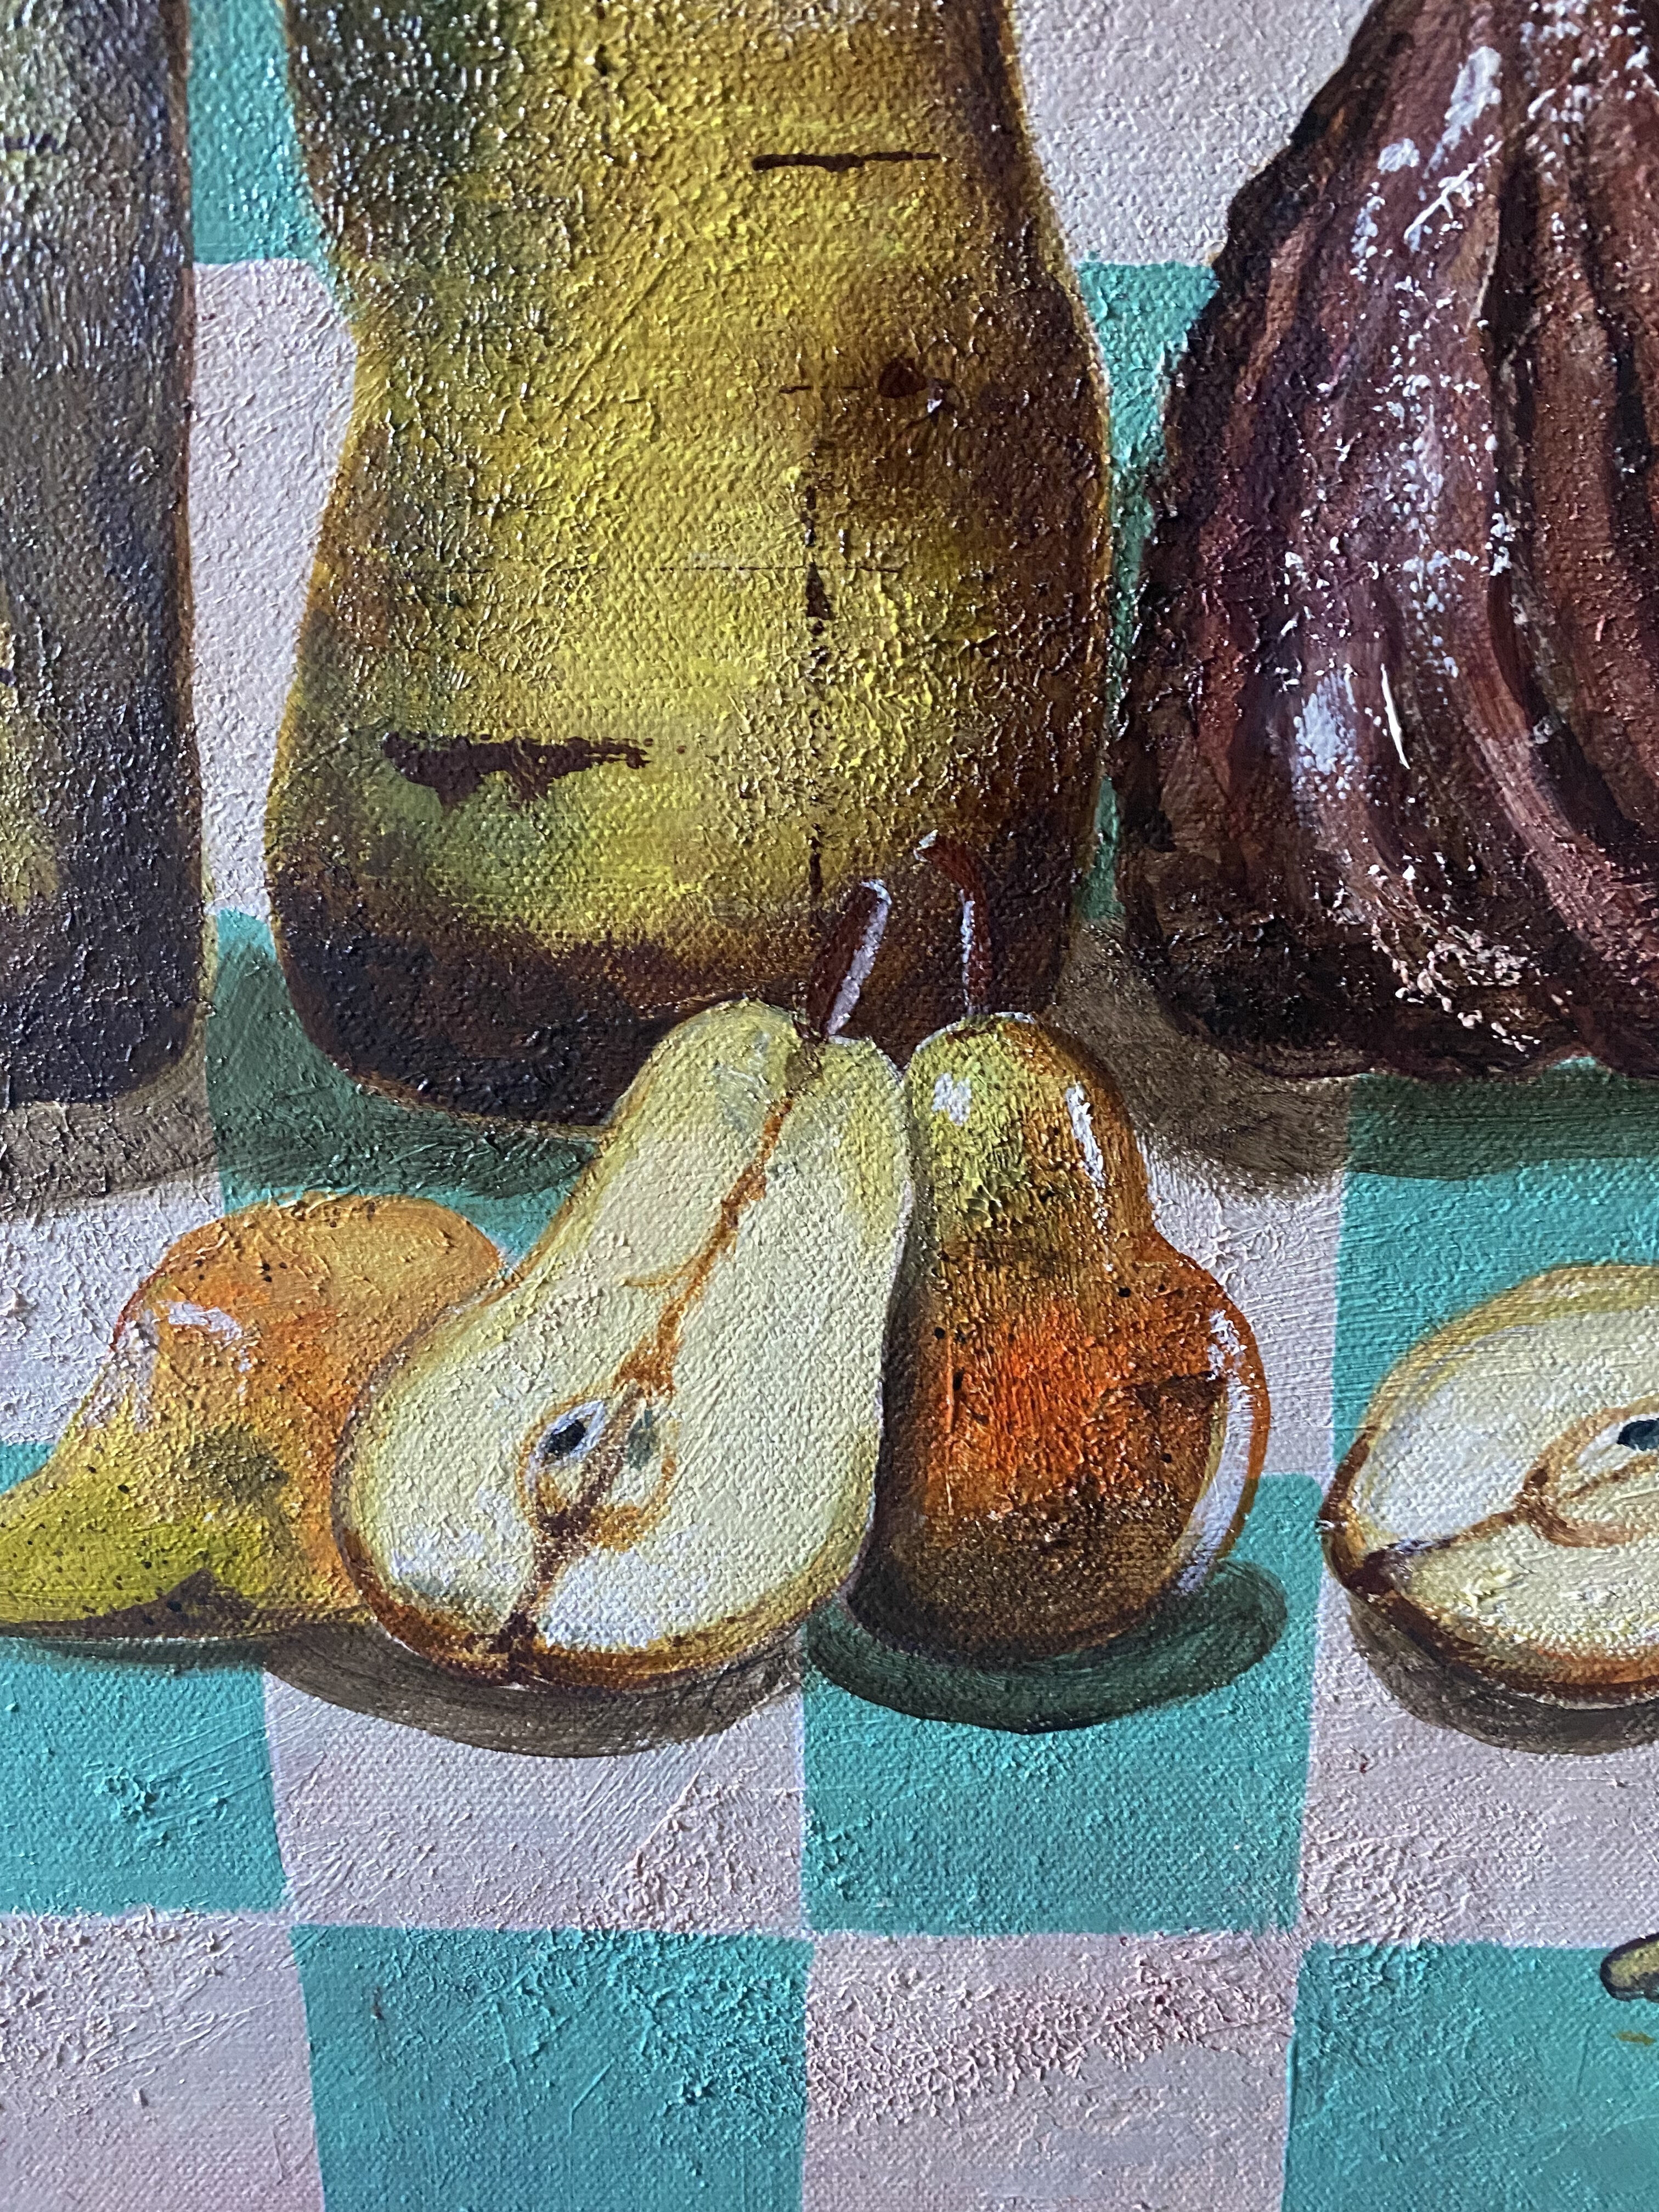 Pears_and_Blue_Cheese_closeup1_Wendy_Peters